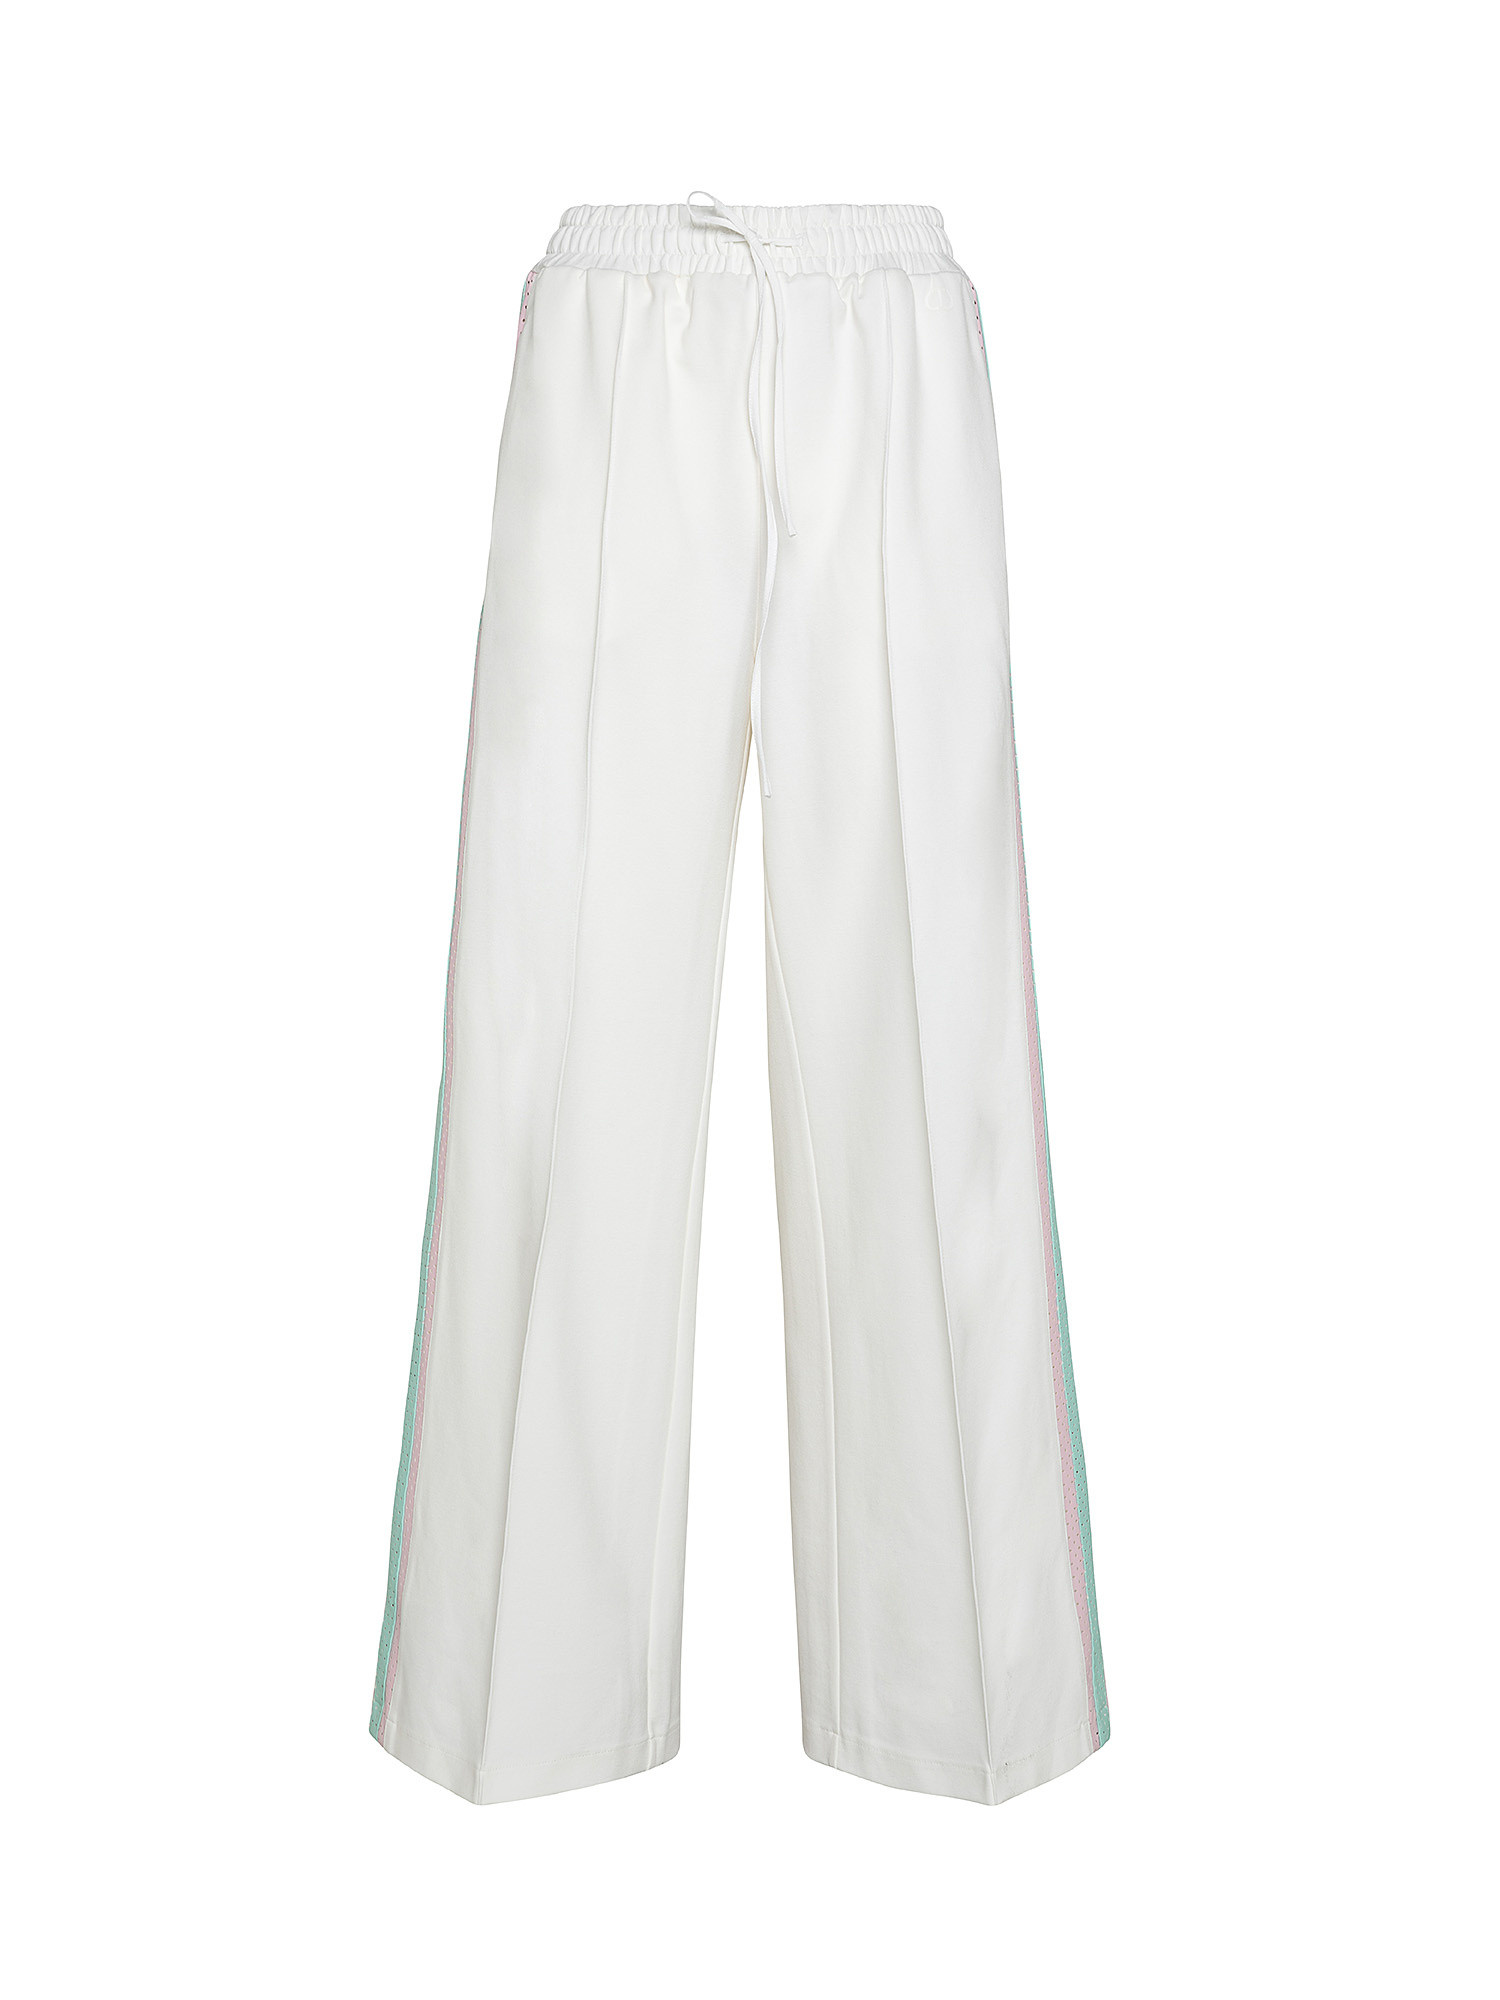 Trousers with perforated inserts, White, large image number 0